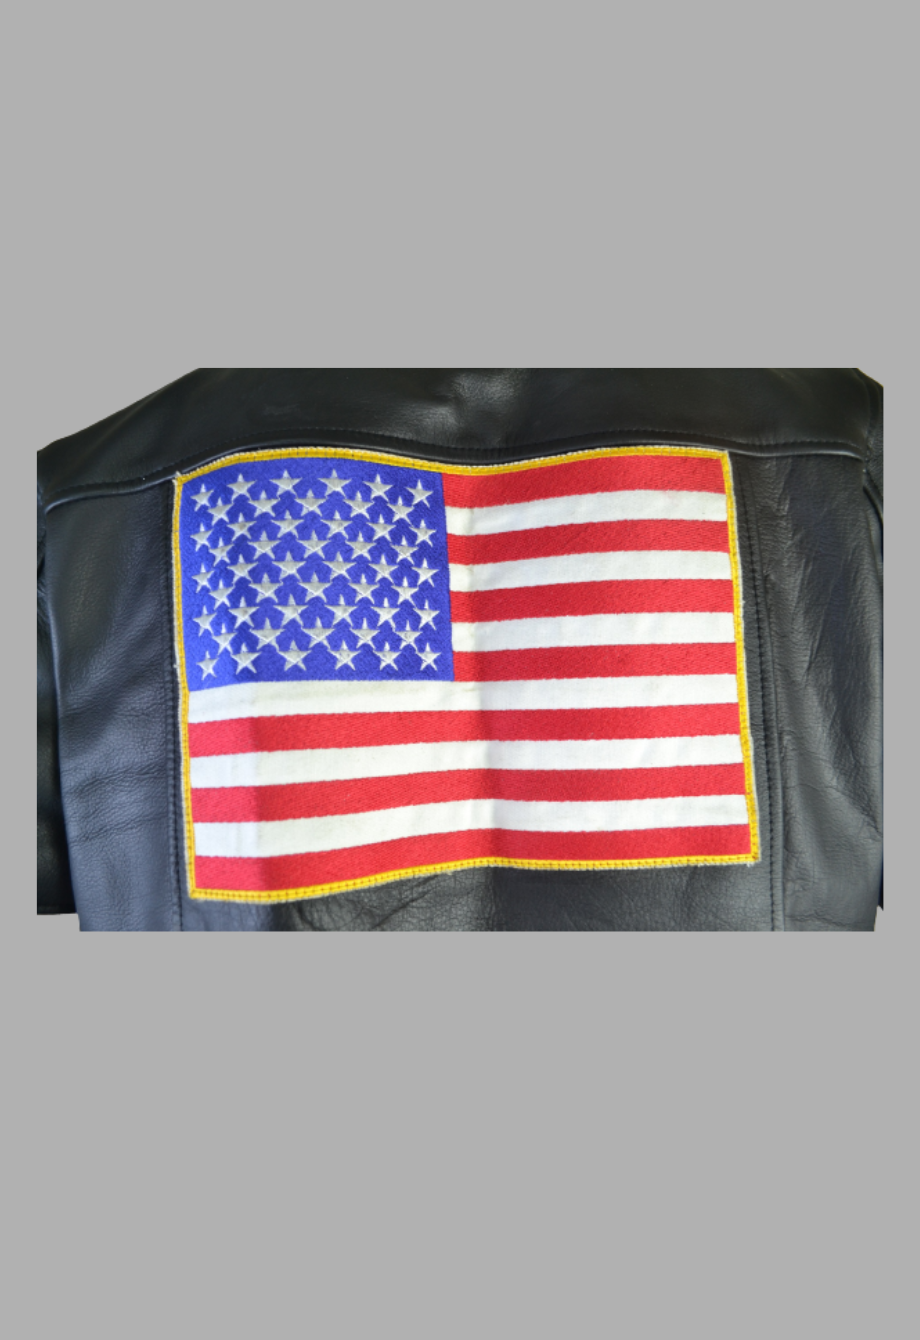 American Star Biker Black Captain Leather Jacket with USA Flag